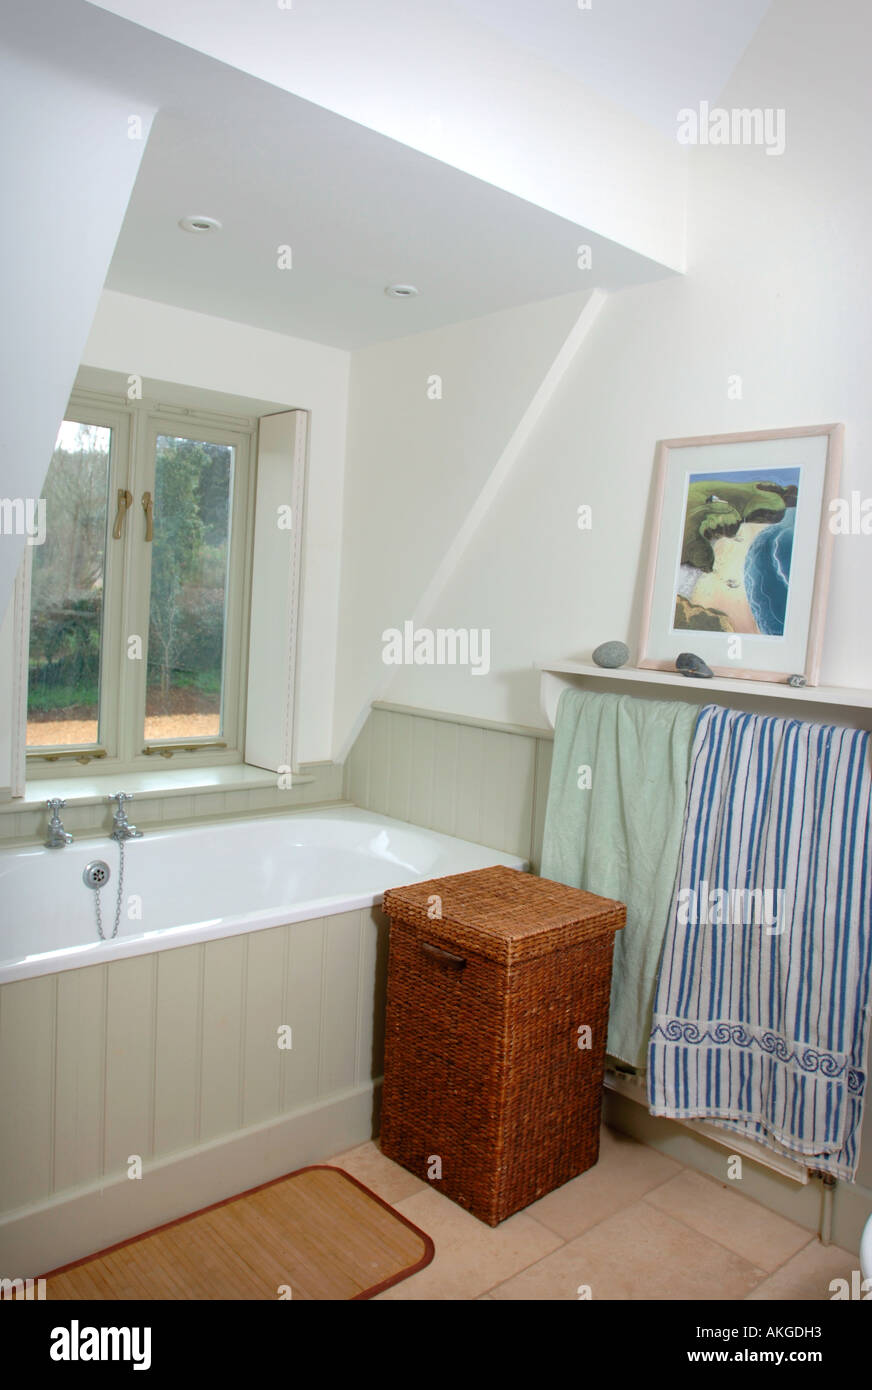 THE BATHROOM OF A TIMBER FRAMED HOUSE GLOUCESTERSHIRE UK Stock Photo